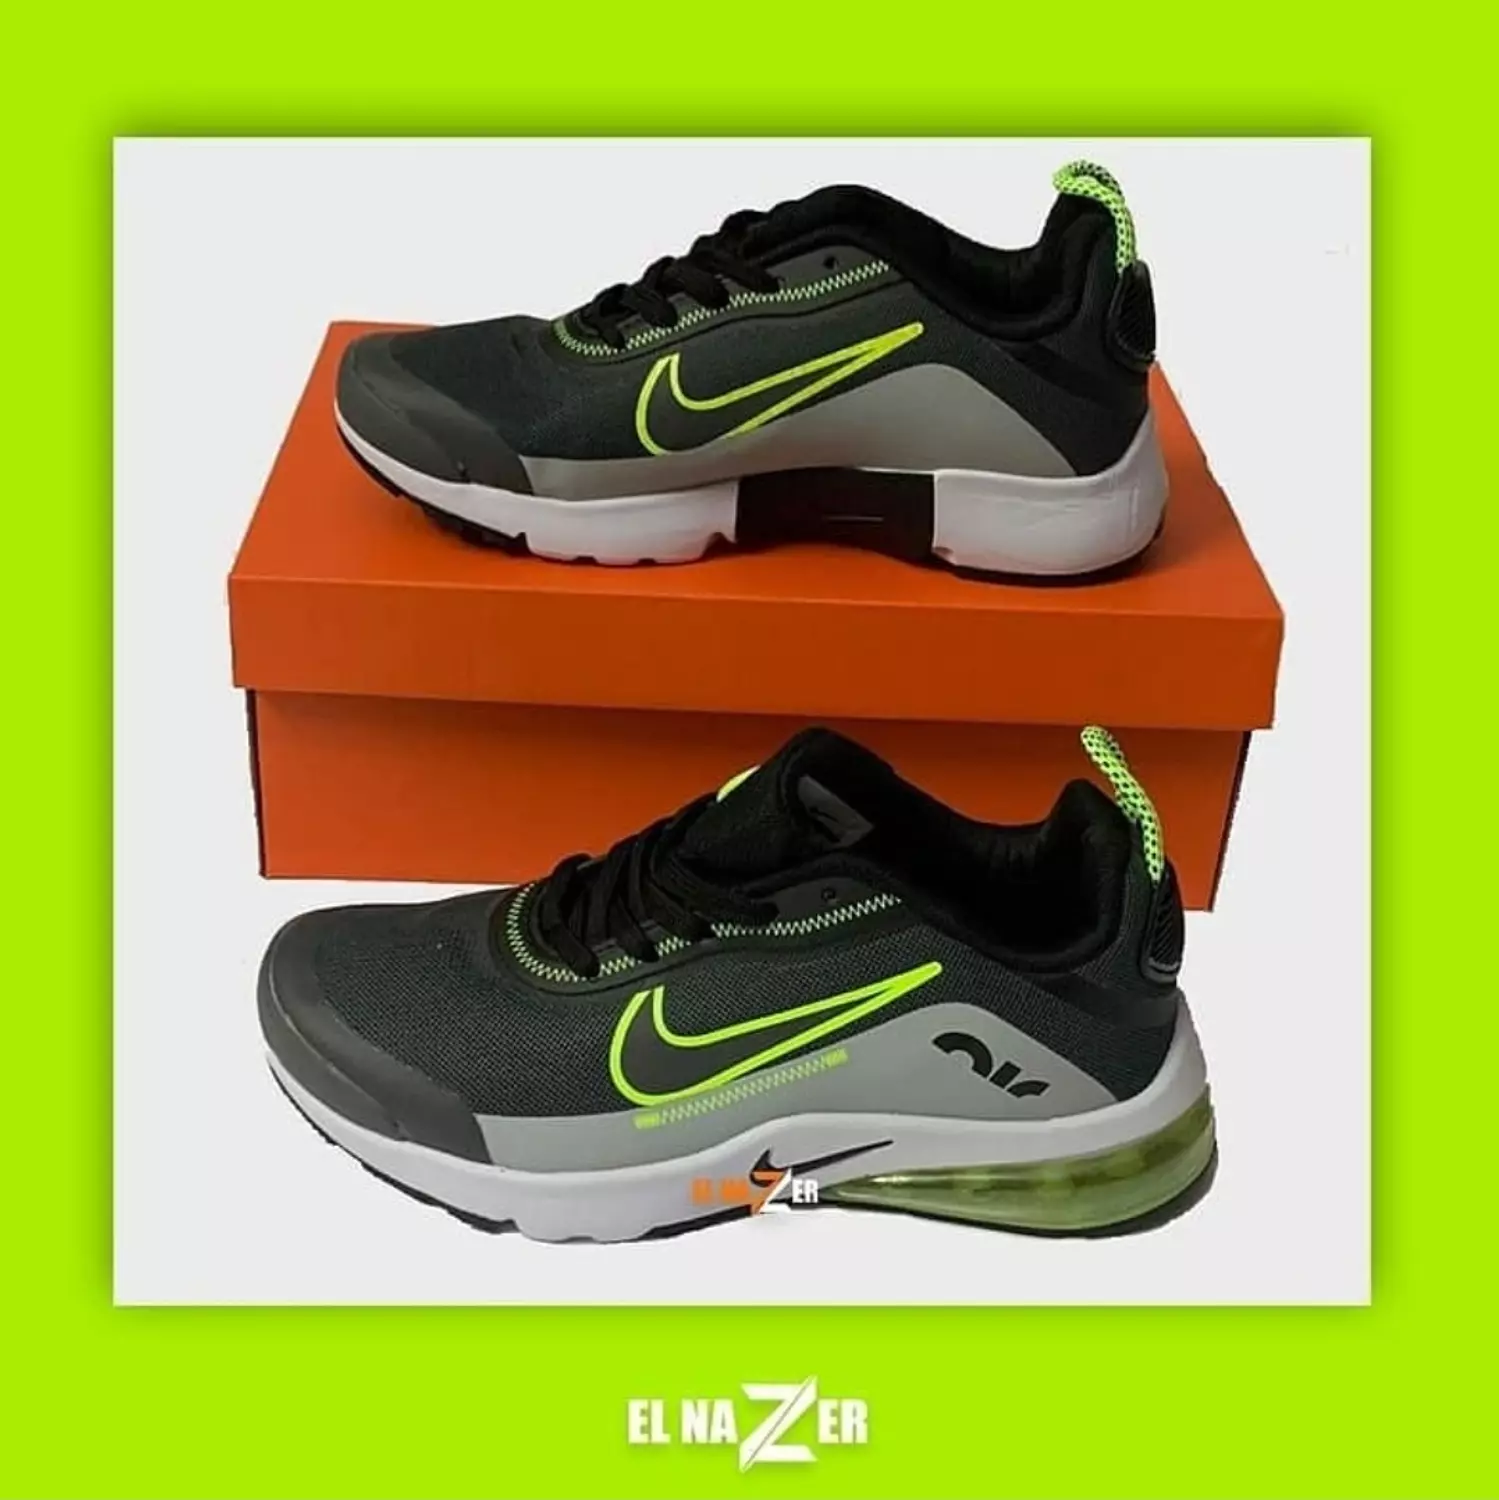 NIKE AIR - RUNNING SHOES hover image